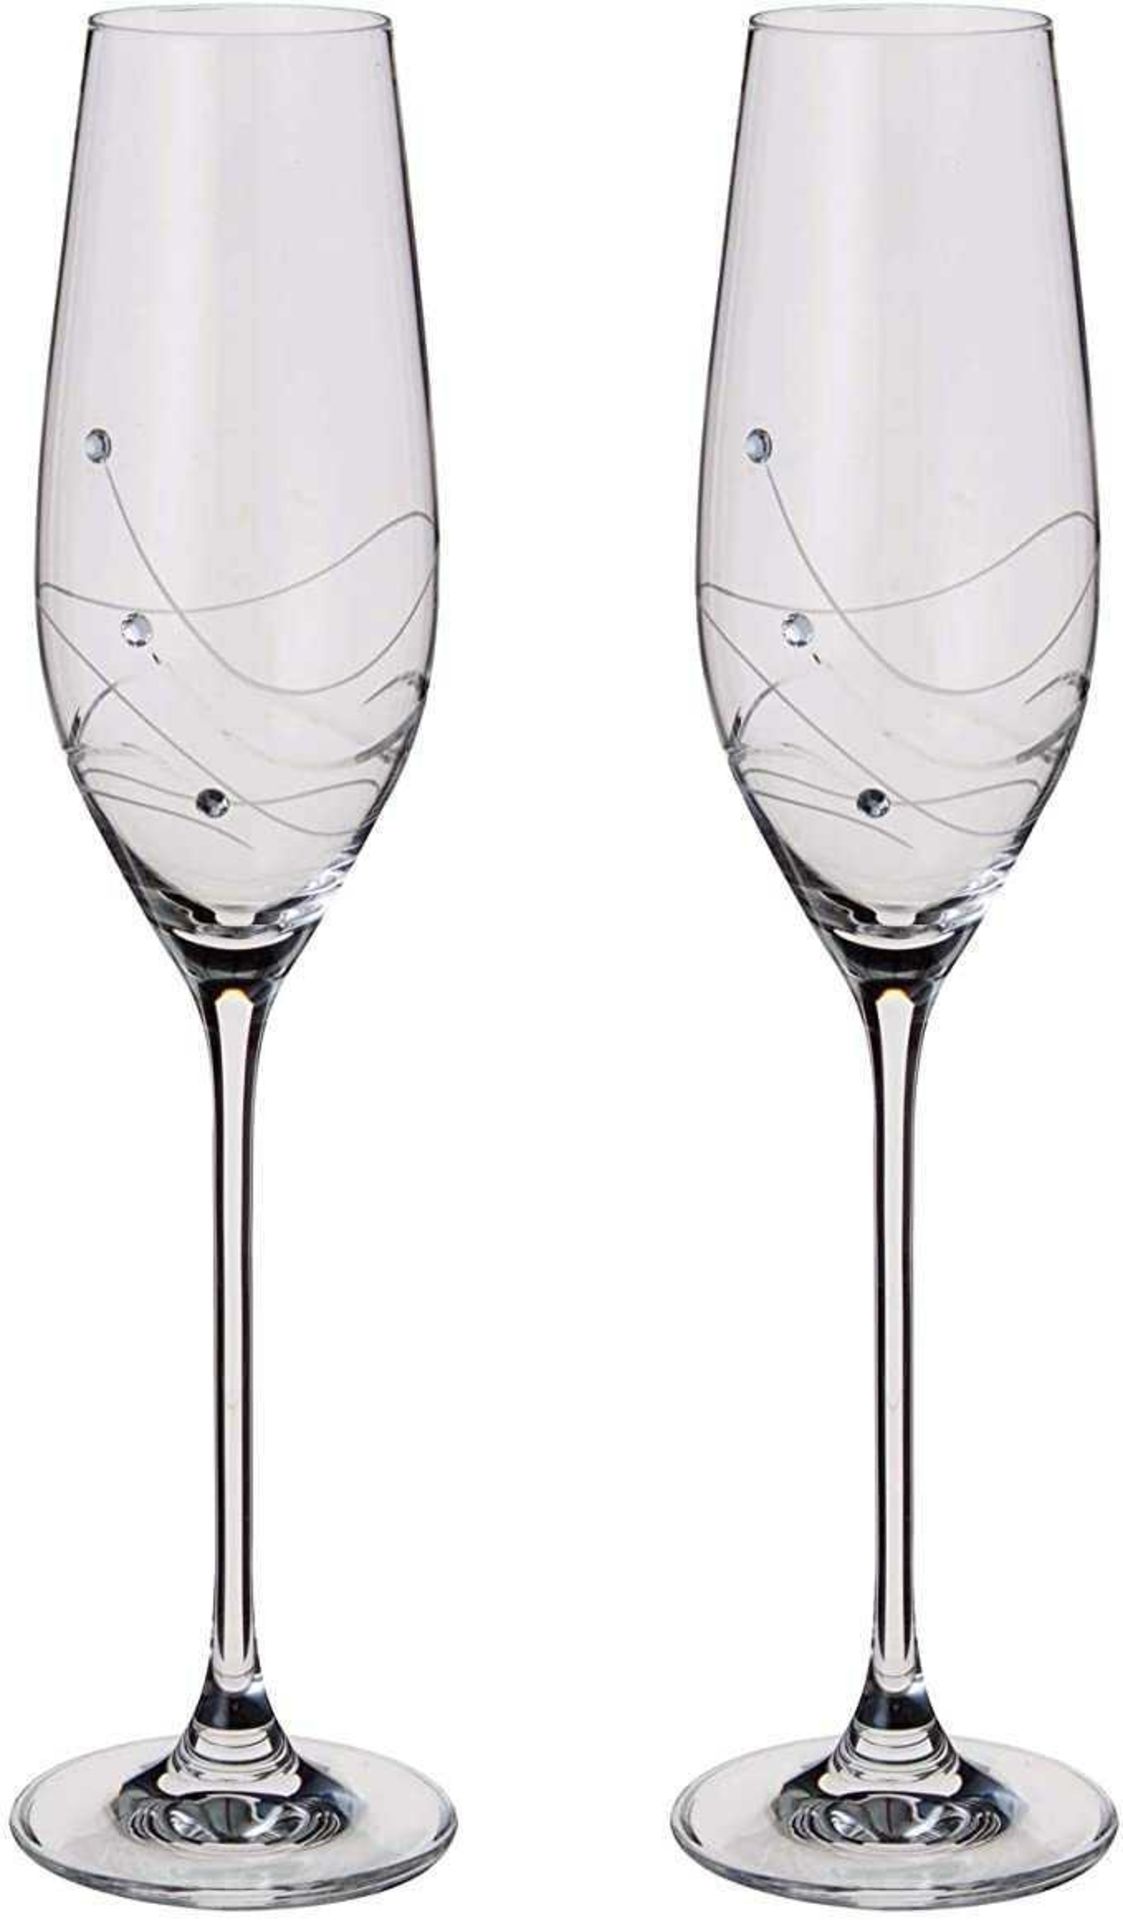 Combined RRP £180 Lot To Contain Six Boxed John Lewis Celebrate Crystal Glass 2 Champagne Flute